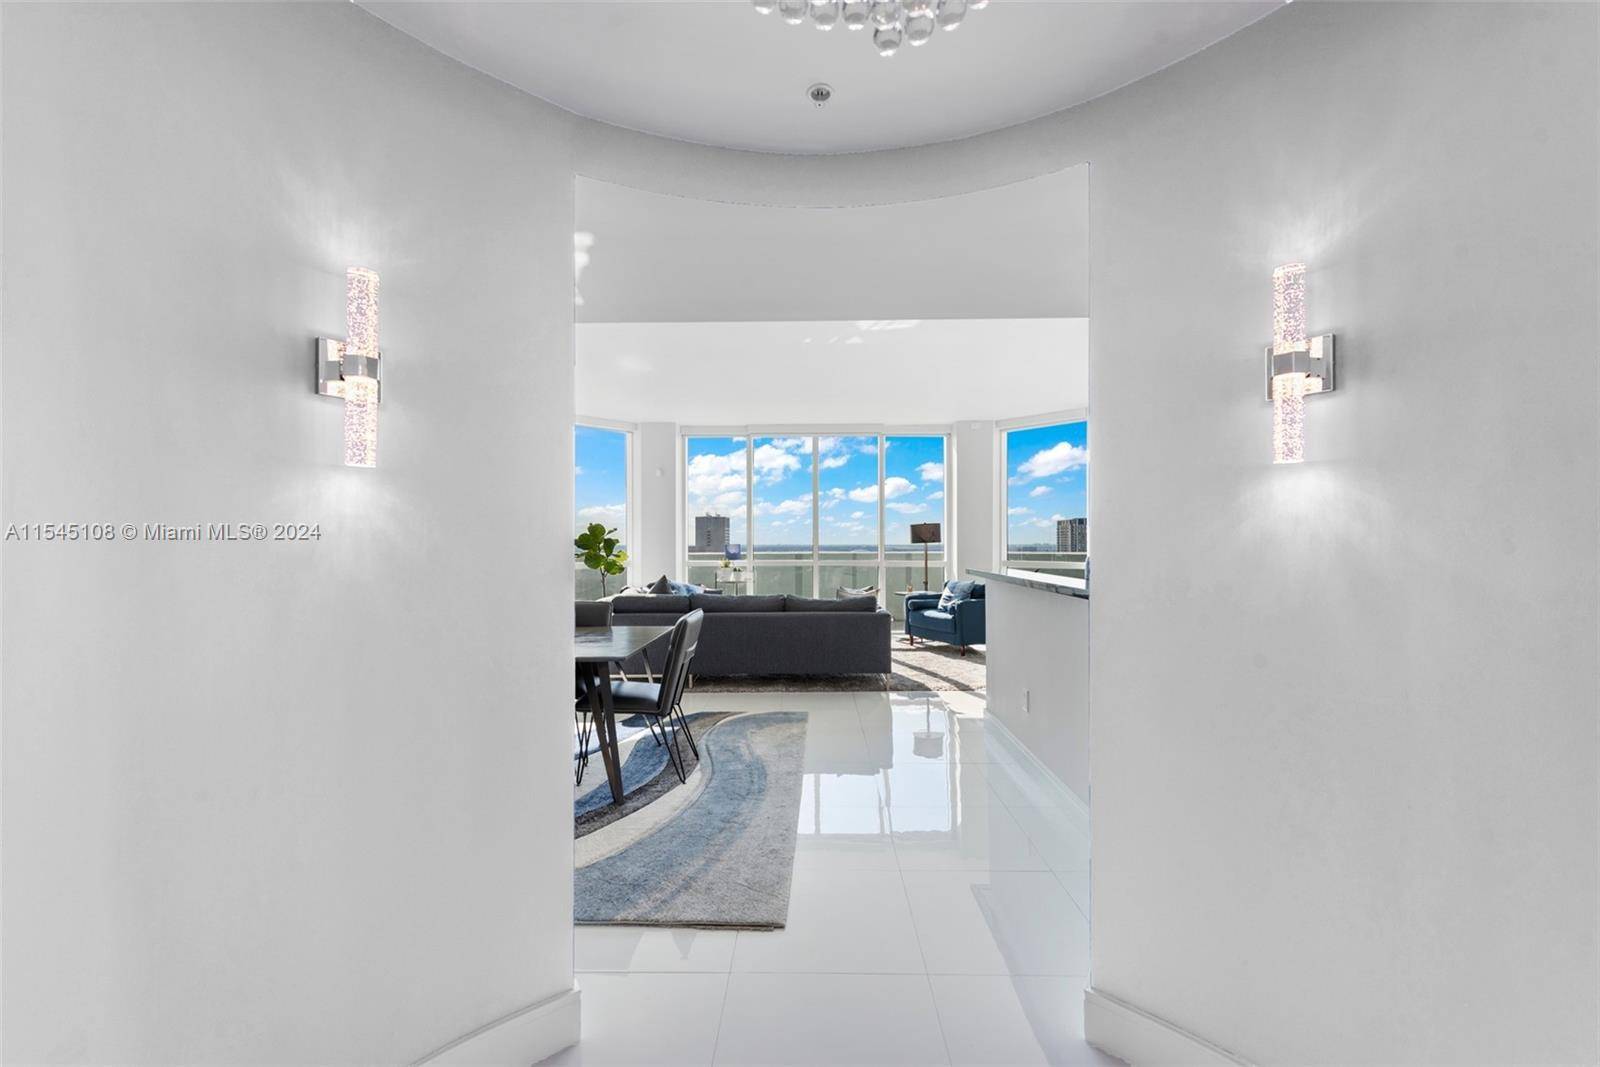 Discover the epitome of luxury living with this unique 3 bedroom 3 bathroom residence in Vizcayne North, boasting unparalleled outdoor space and breathtaking views of the Miami Skyline Biscayne Bay ...